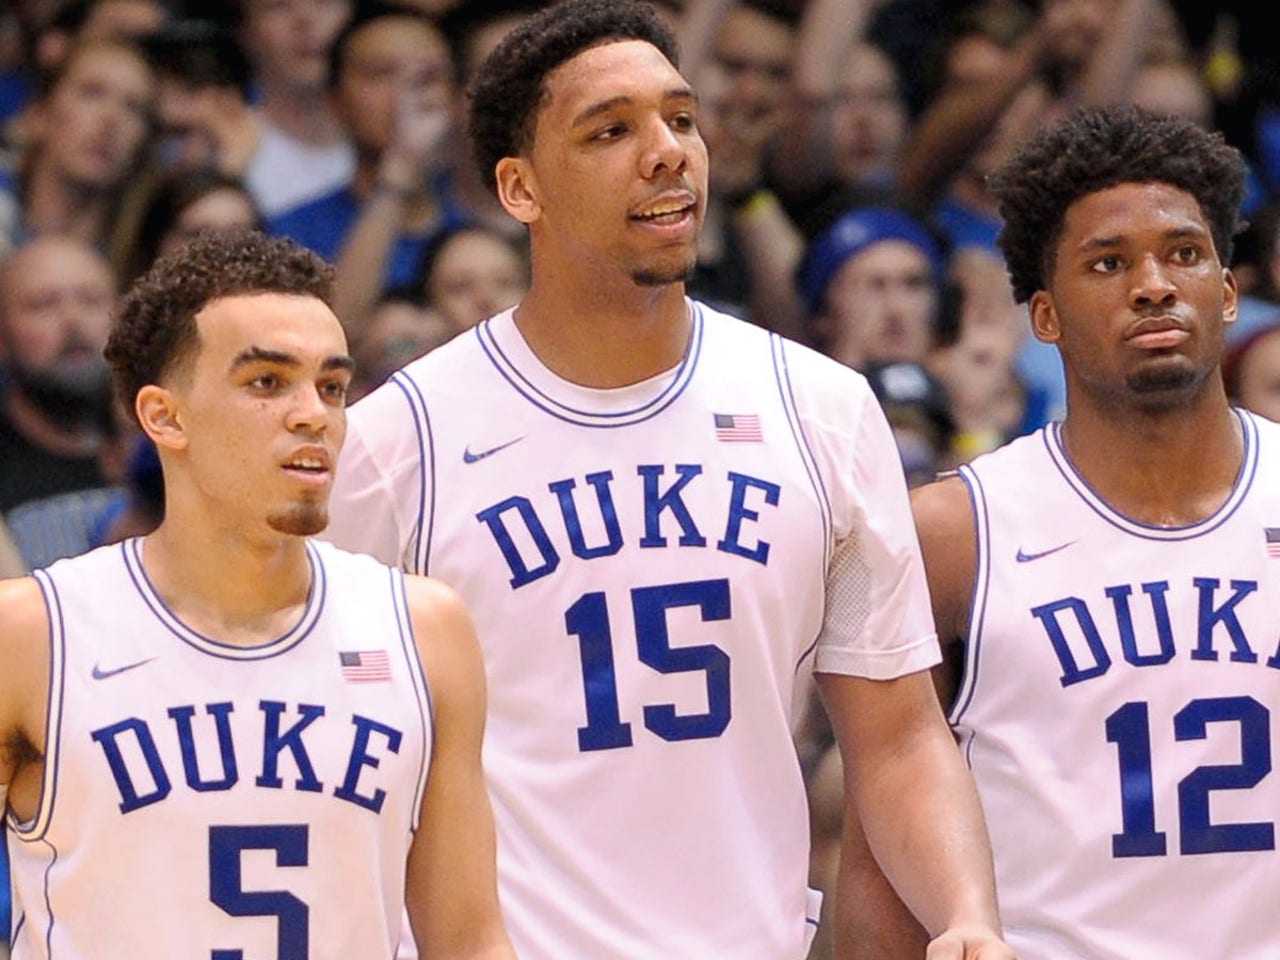 Four big questions for Duke - by Clint Jackson